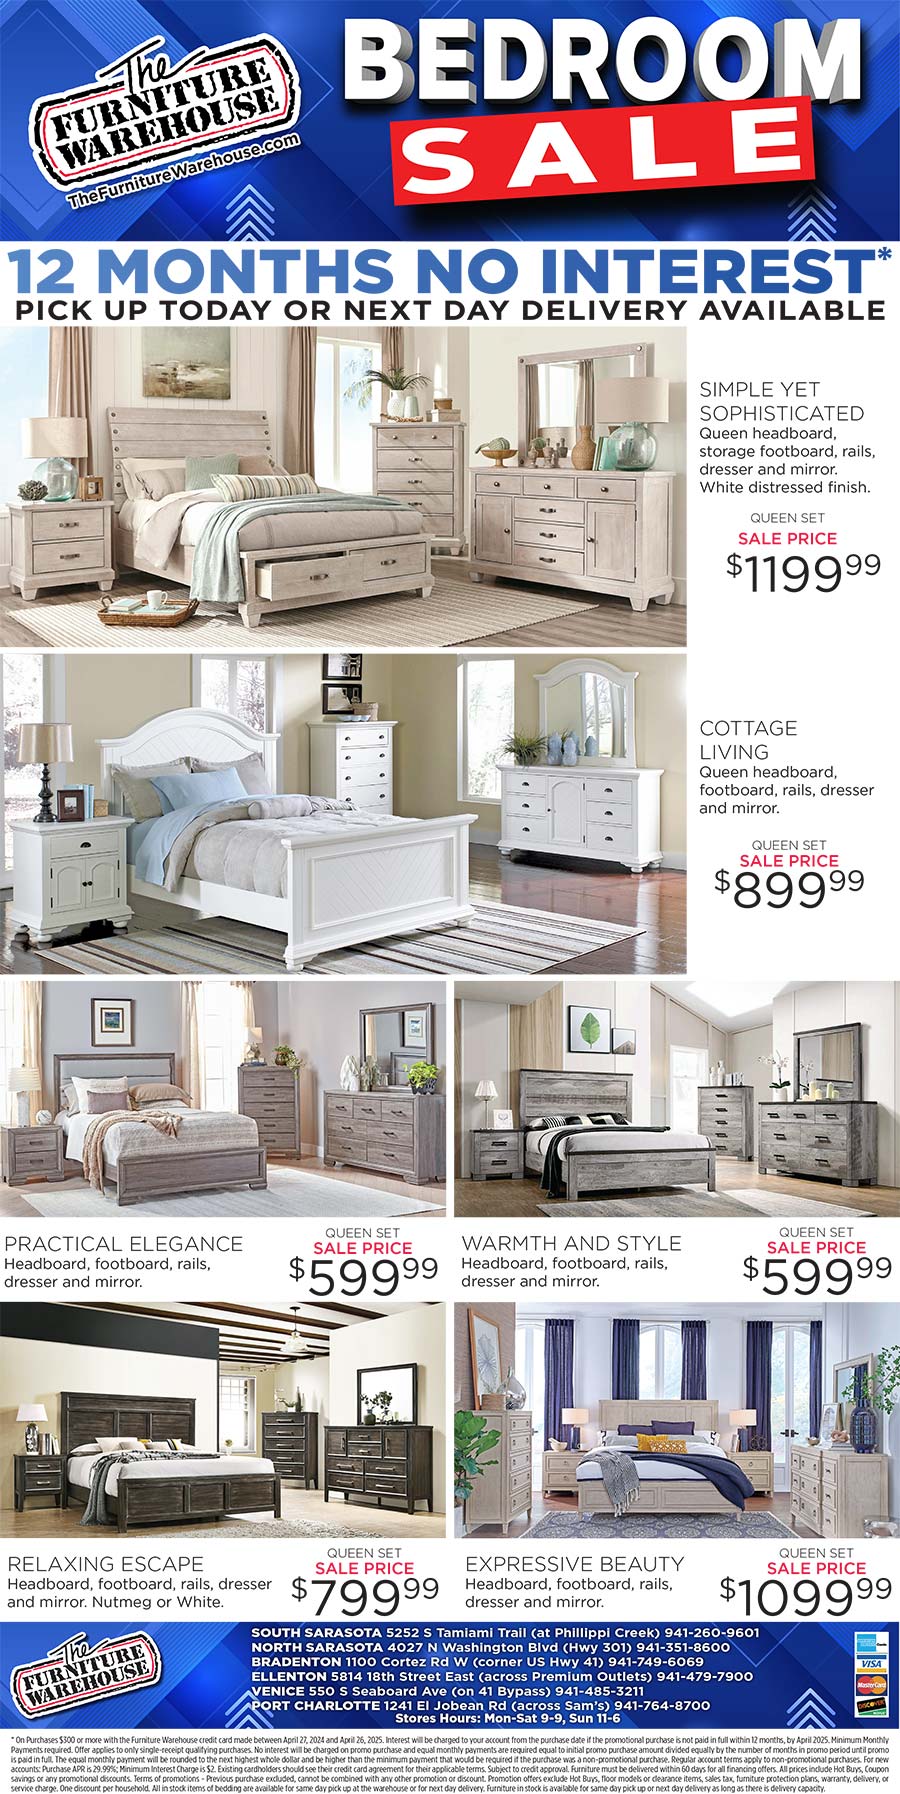 Big Savings! Our Bedrooms Sale is On Now! Trends to Fit Every Bedroom Style!